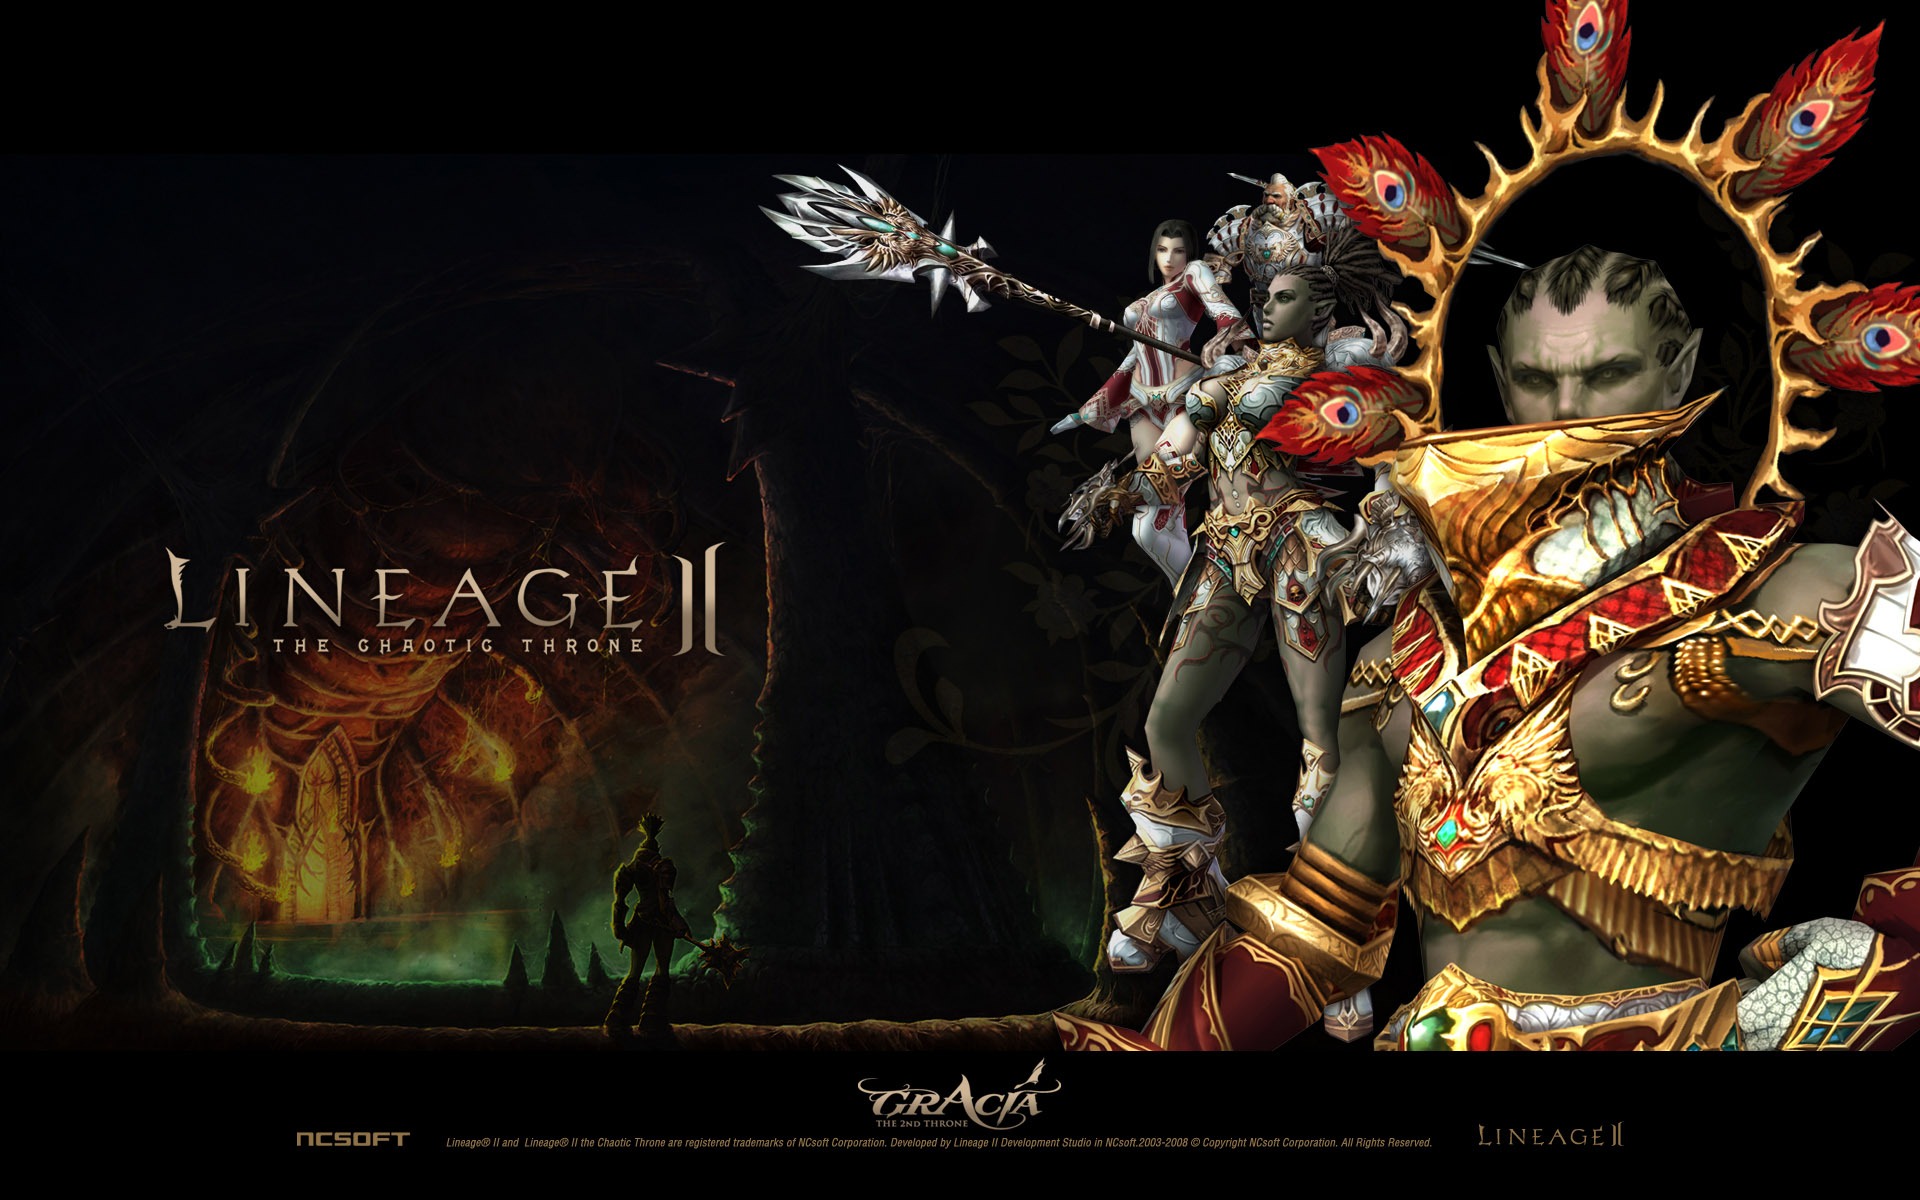 LINEAGE Ⅱ Modellierung HD-Gaming-Wallpaper #2 - 1920x1200